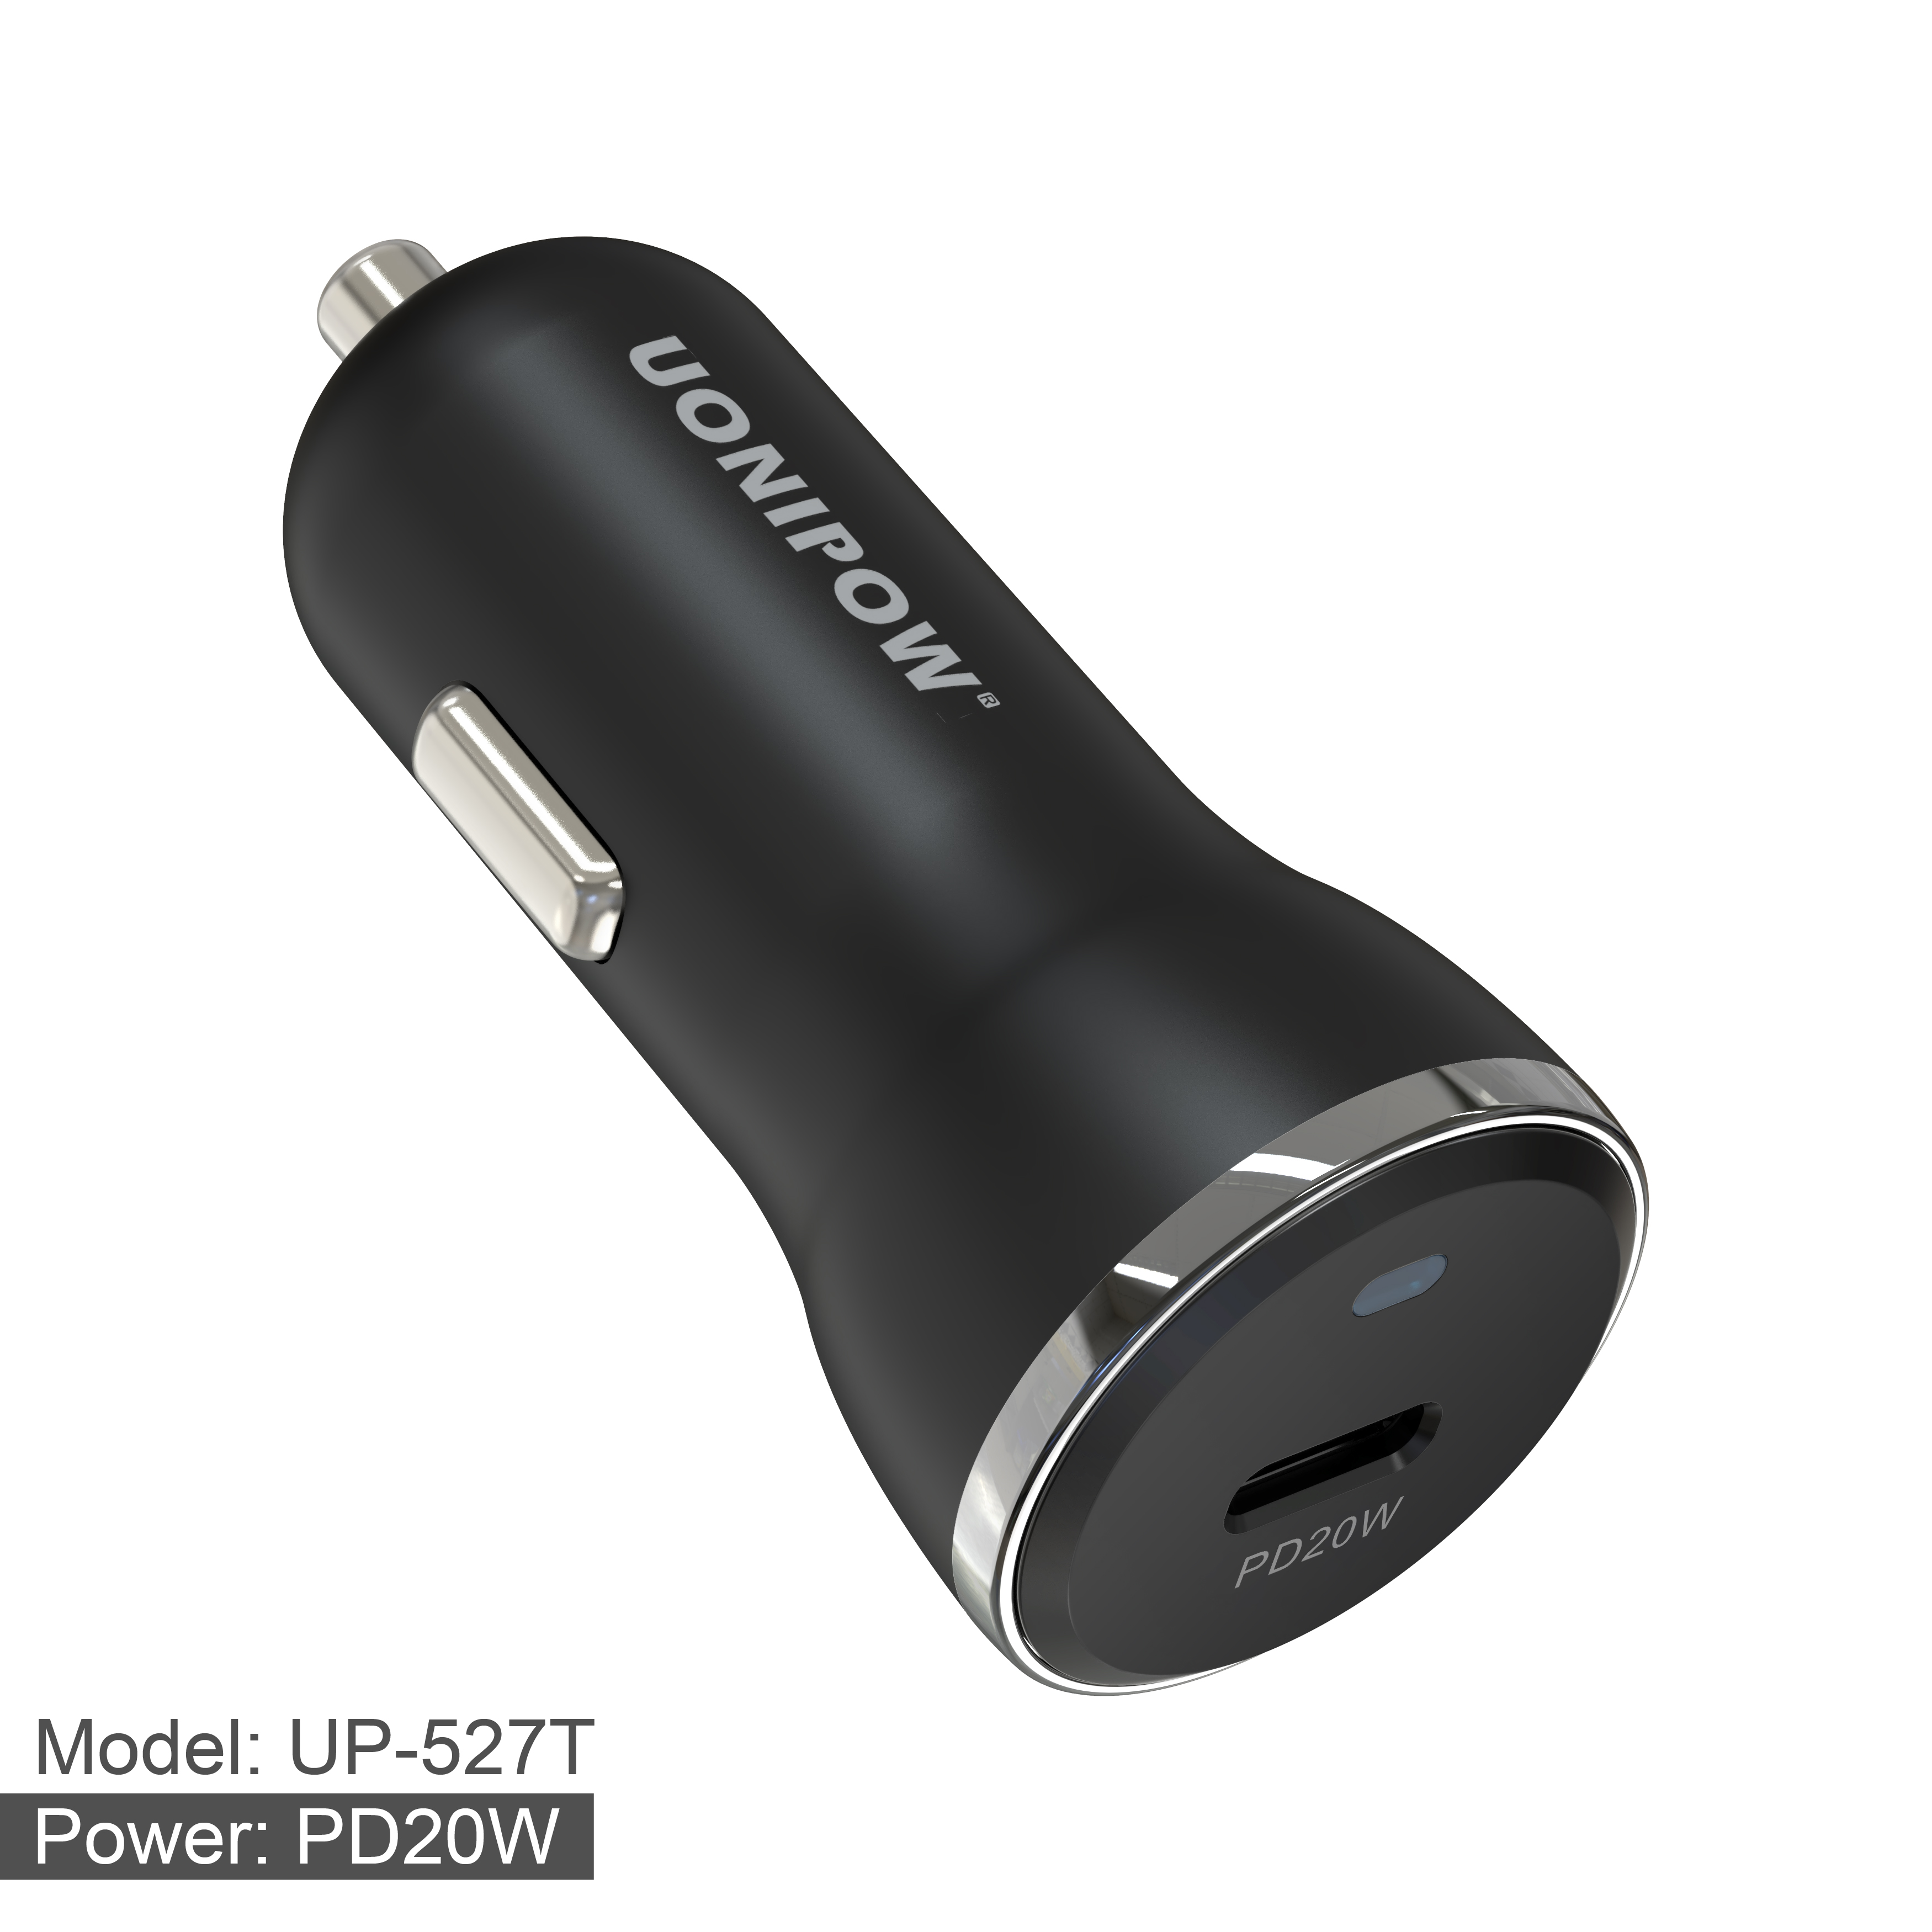 PD20W A + C car charger Manufacturers, PD20W A + C car charger Factory, Supply PD20W A + C car charger